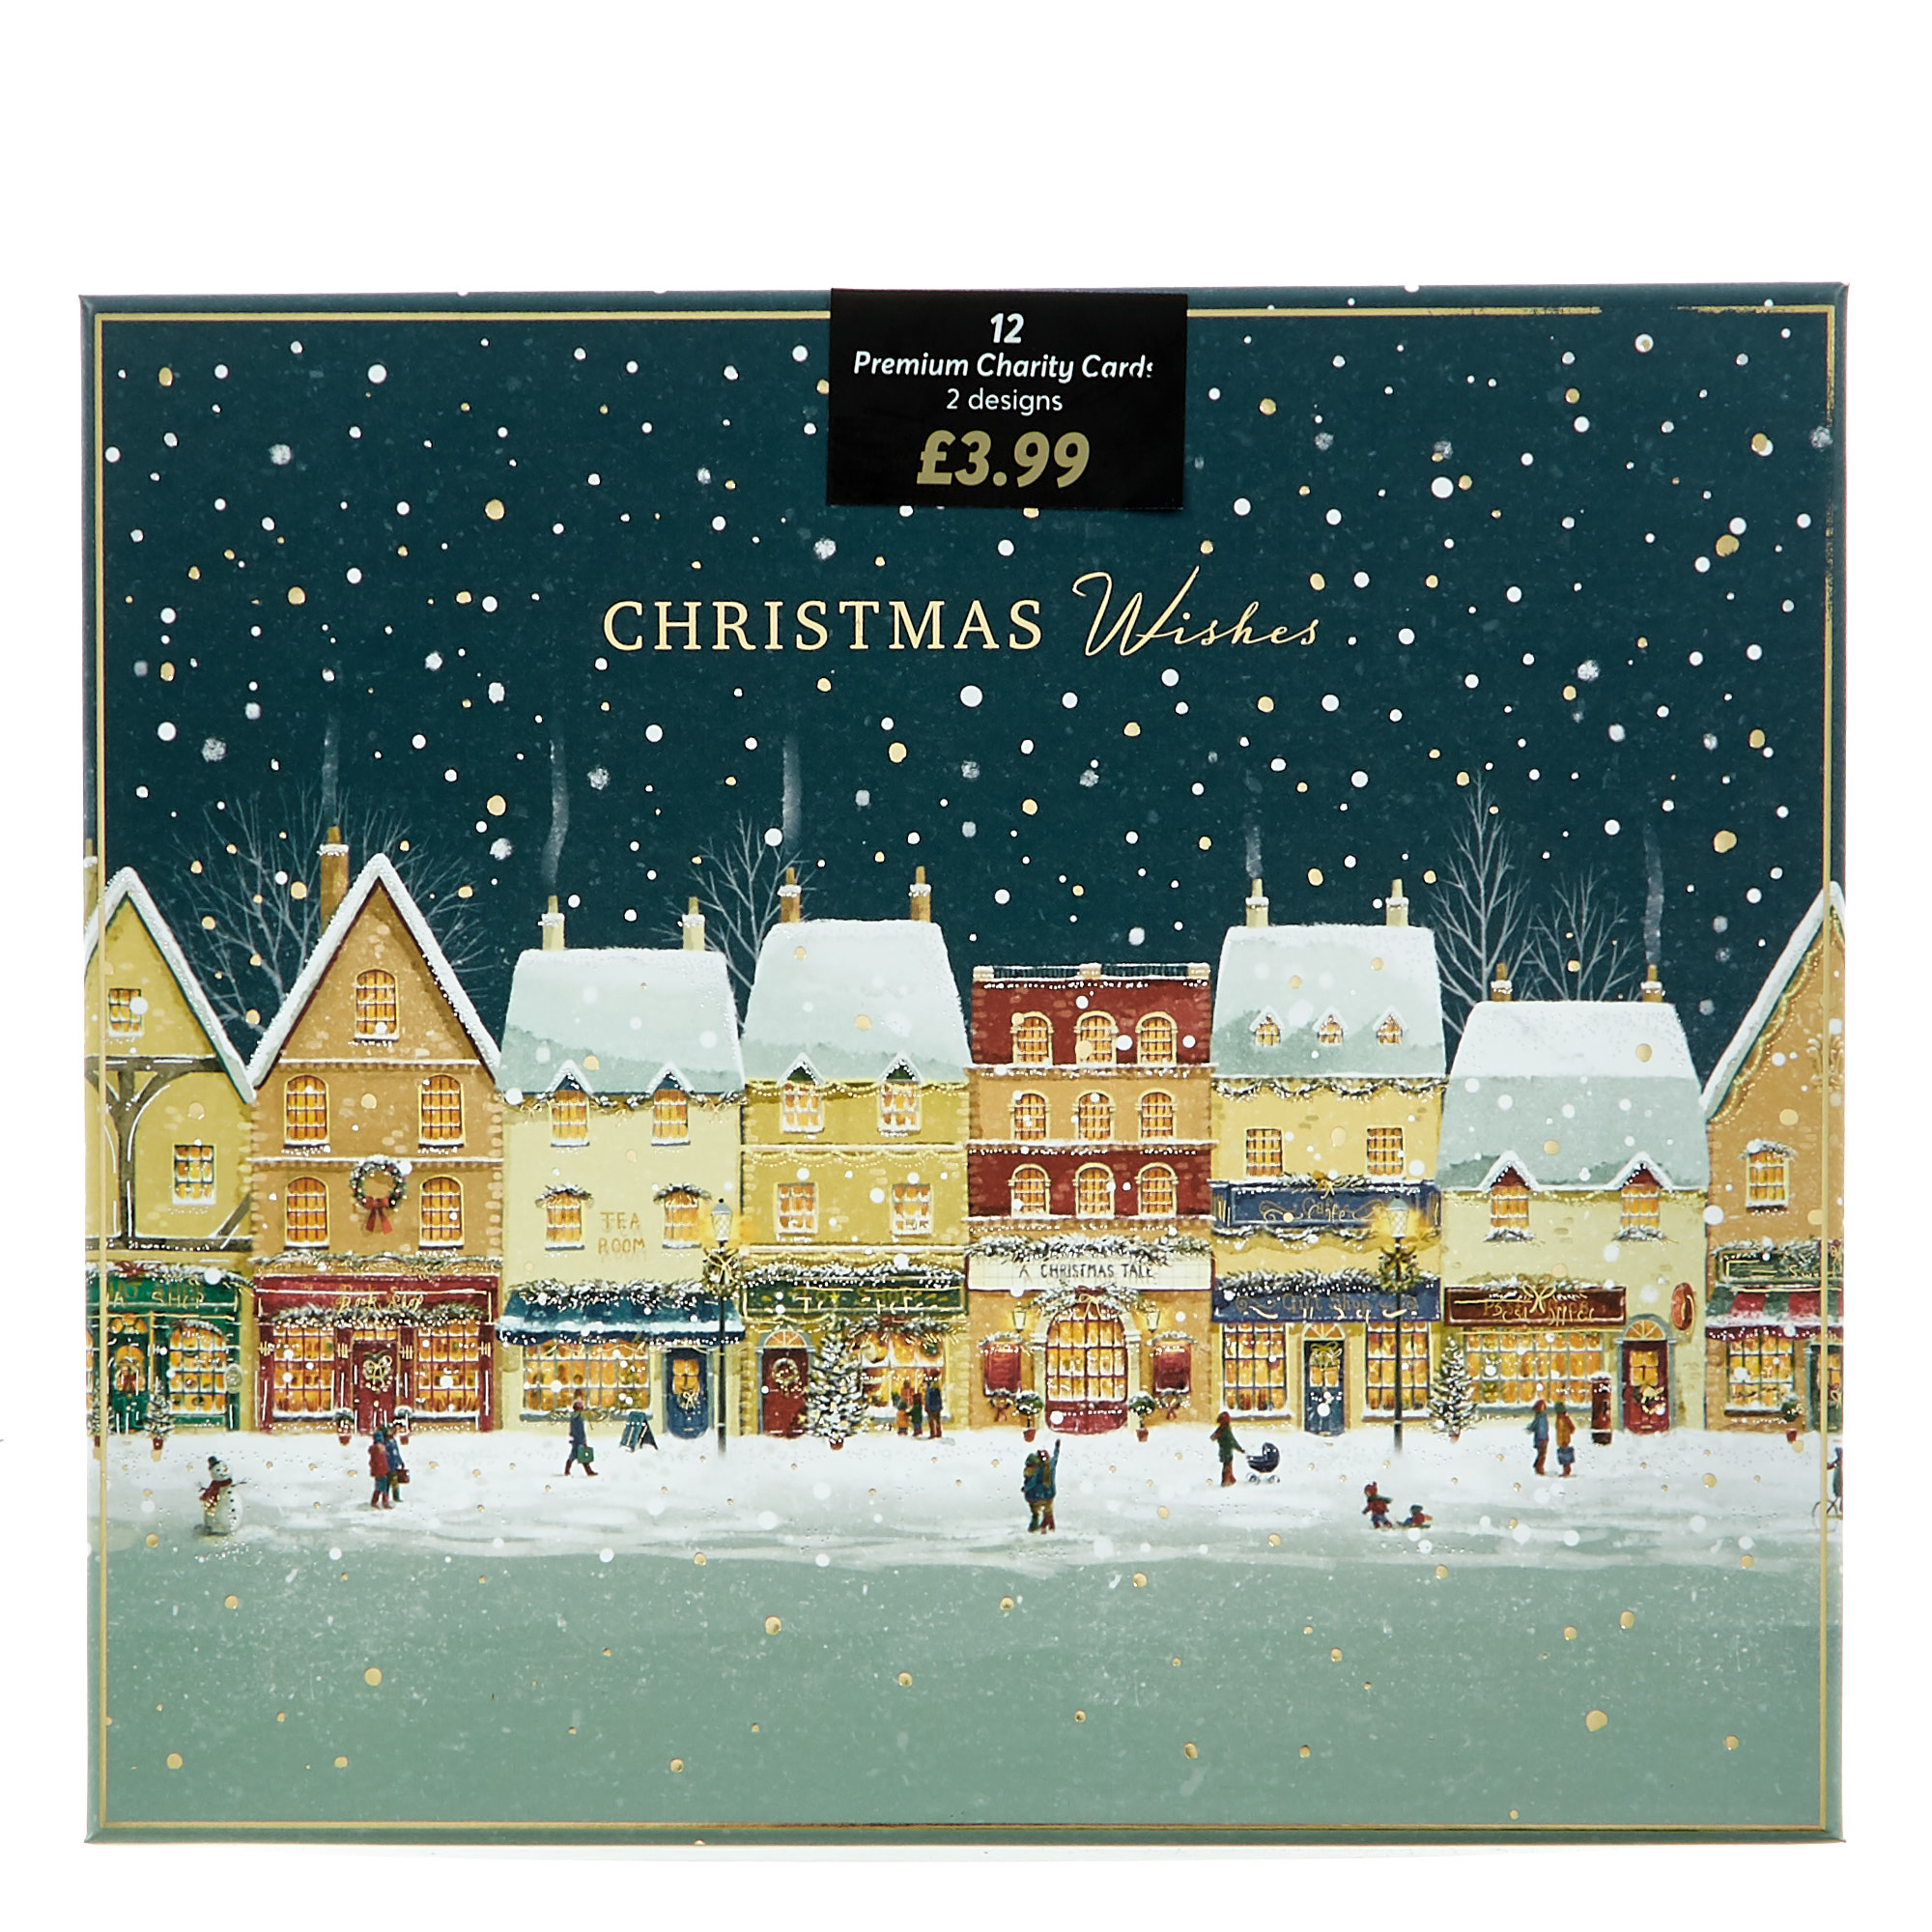 Box of 12 Deluxe Village Scene Charity Christmas Cards - 2 Designs